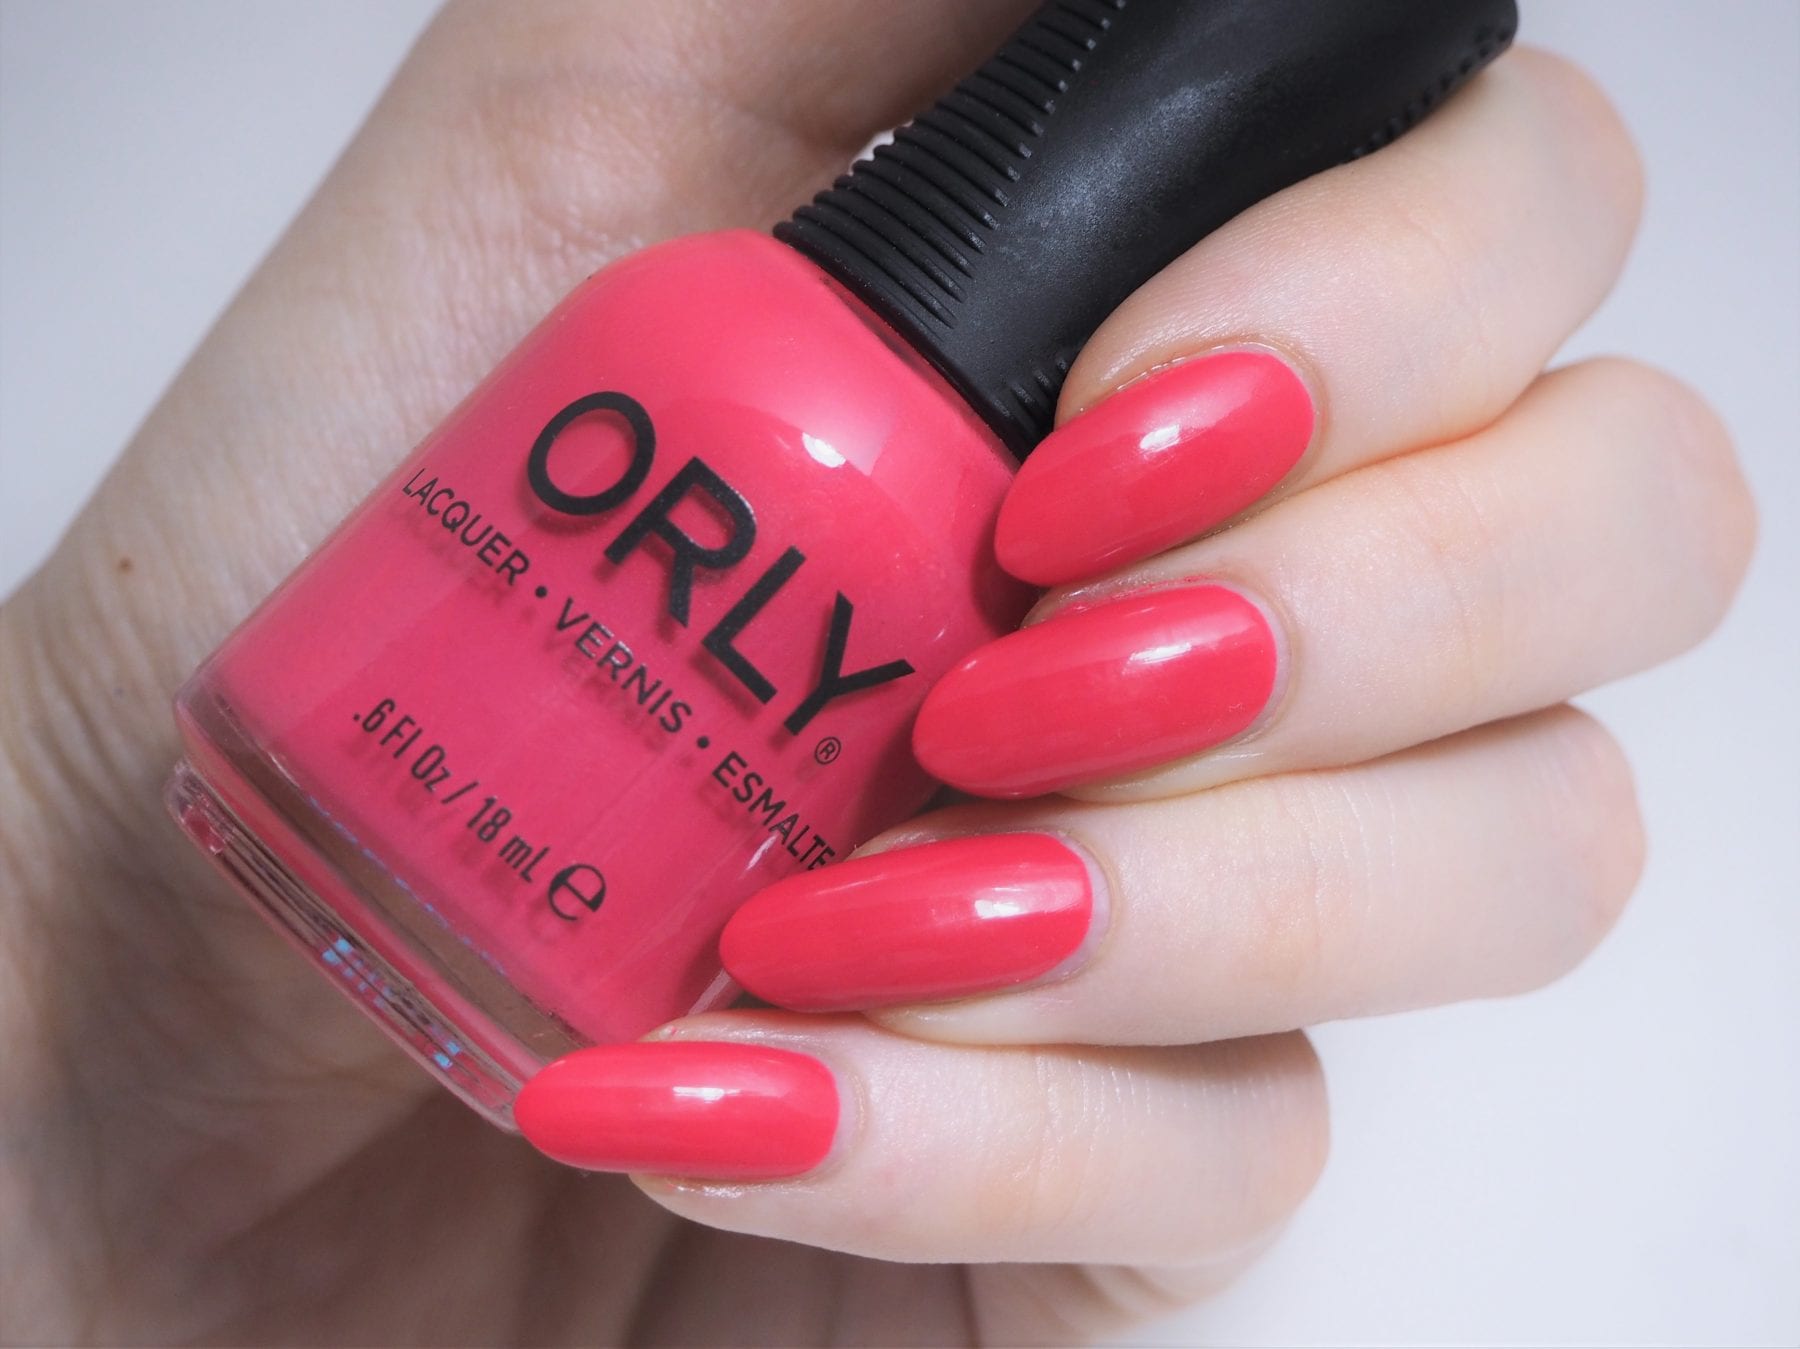 9. Orly Nail Lacquer in "Bare Rose" - wide 3